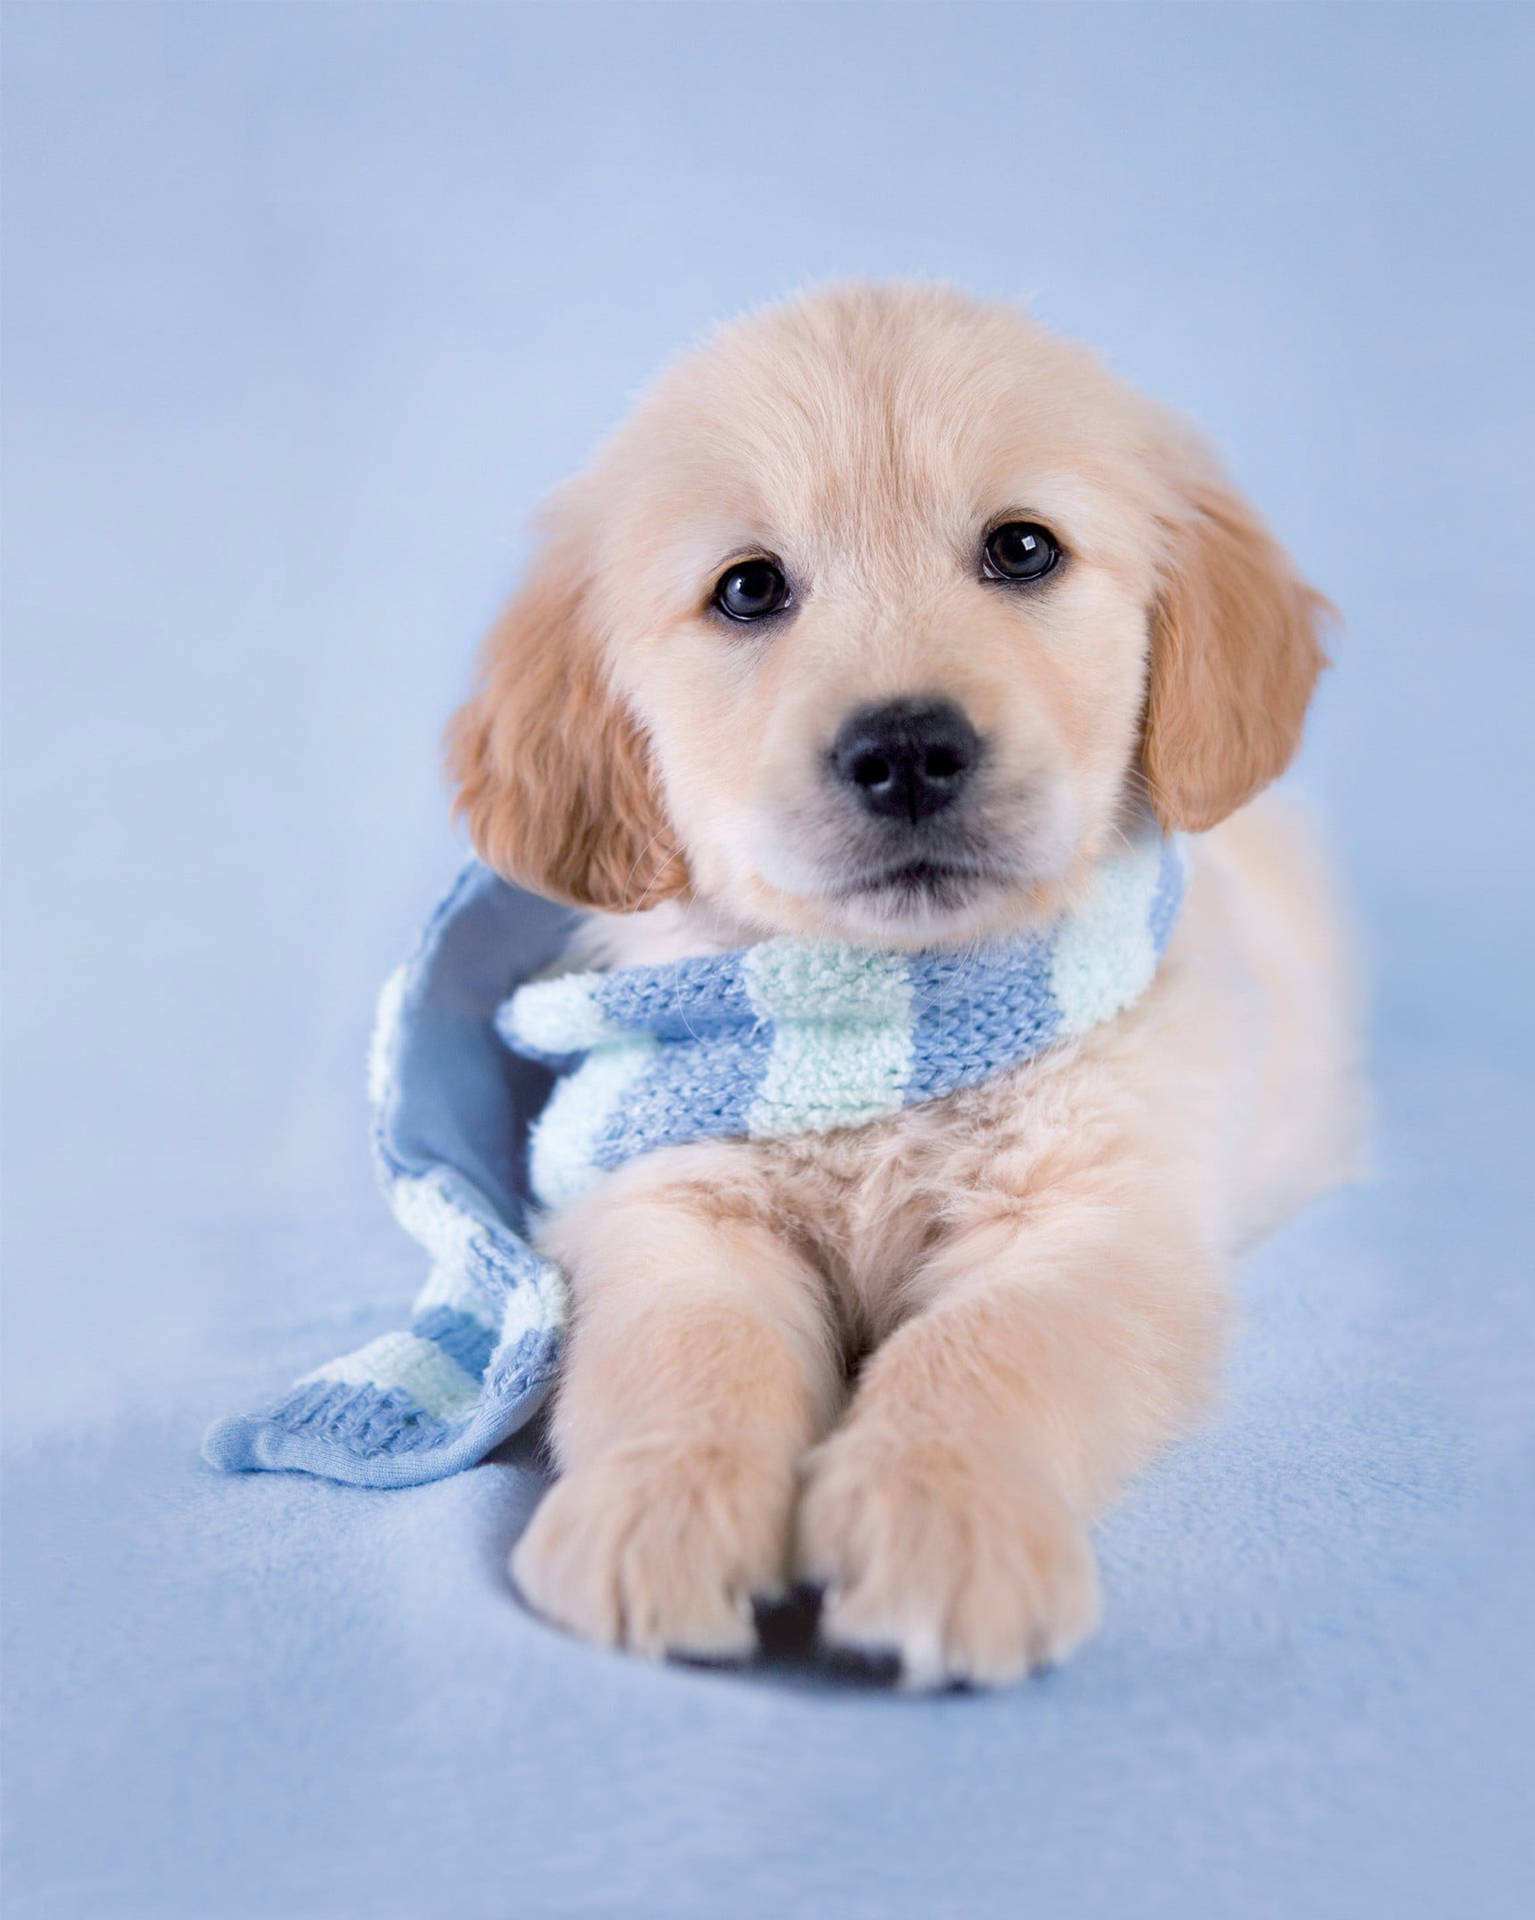 Top 999+ Golden Retriever Puppies Wallpapers Full HD, 4K✅Free to Use